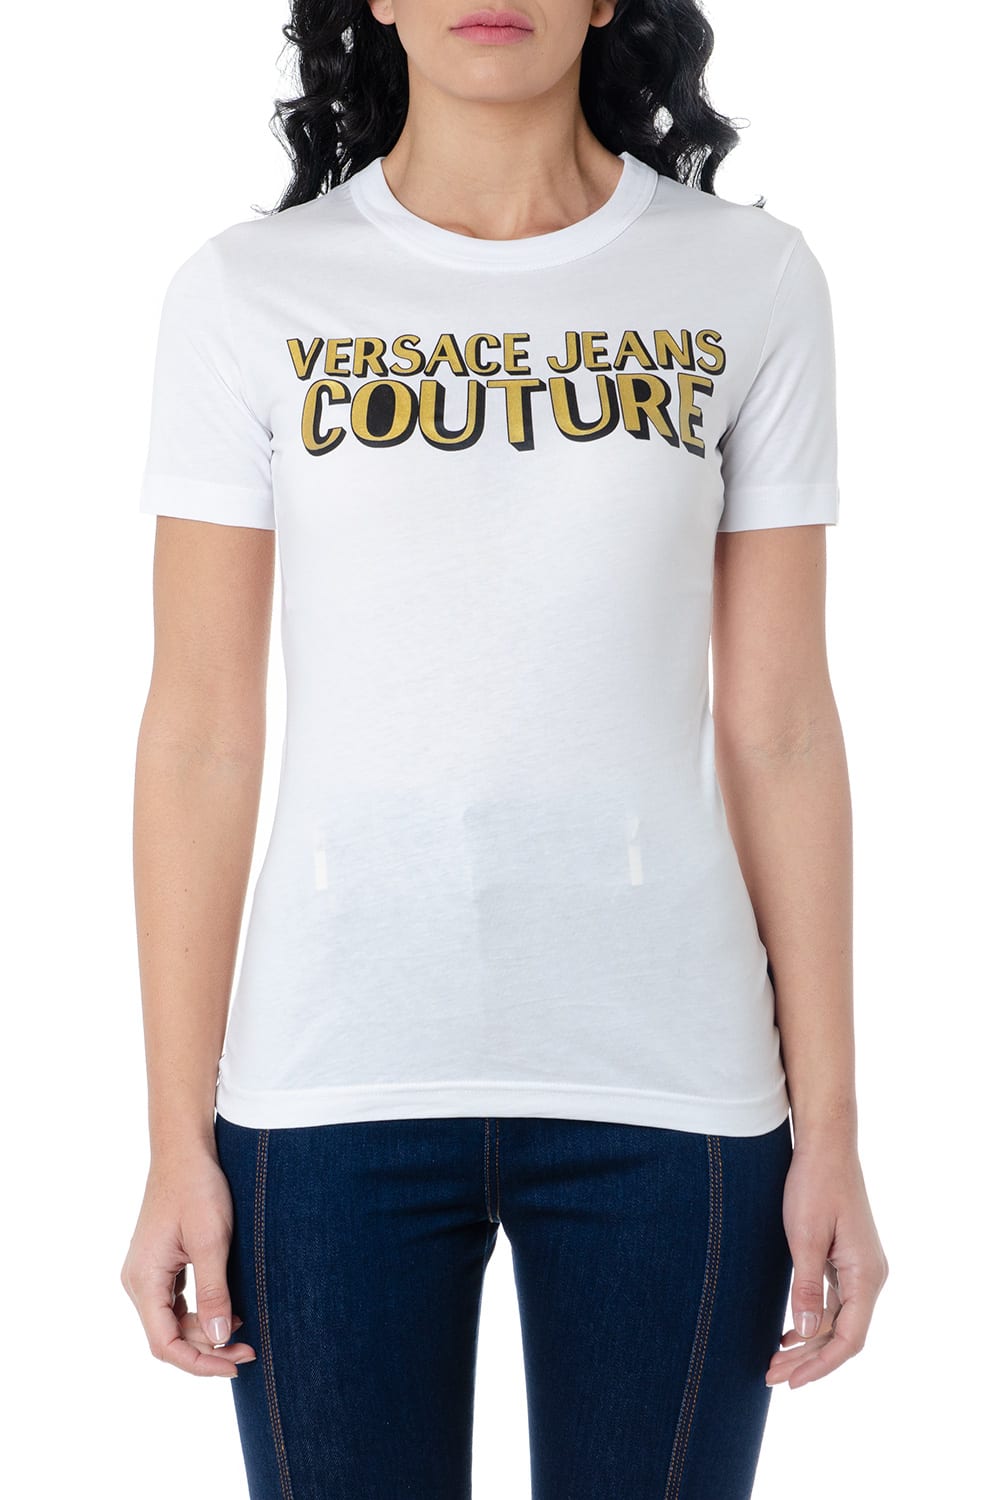 VERSACE JEANS COUTURE WHITE JERSEY T-SHIRT WITH LOGO PRINT,11289206